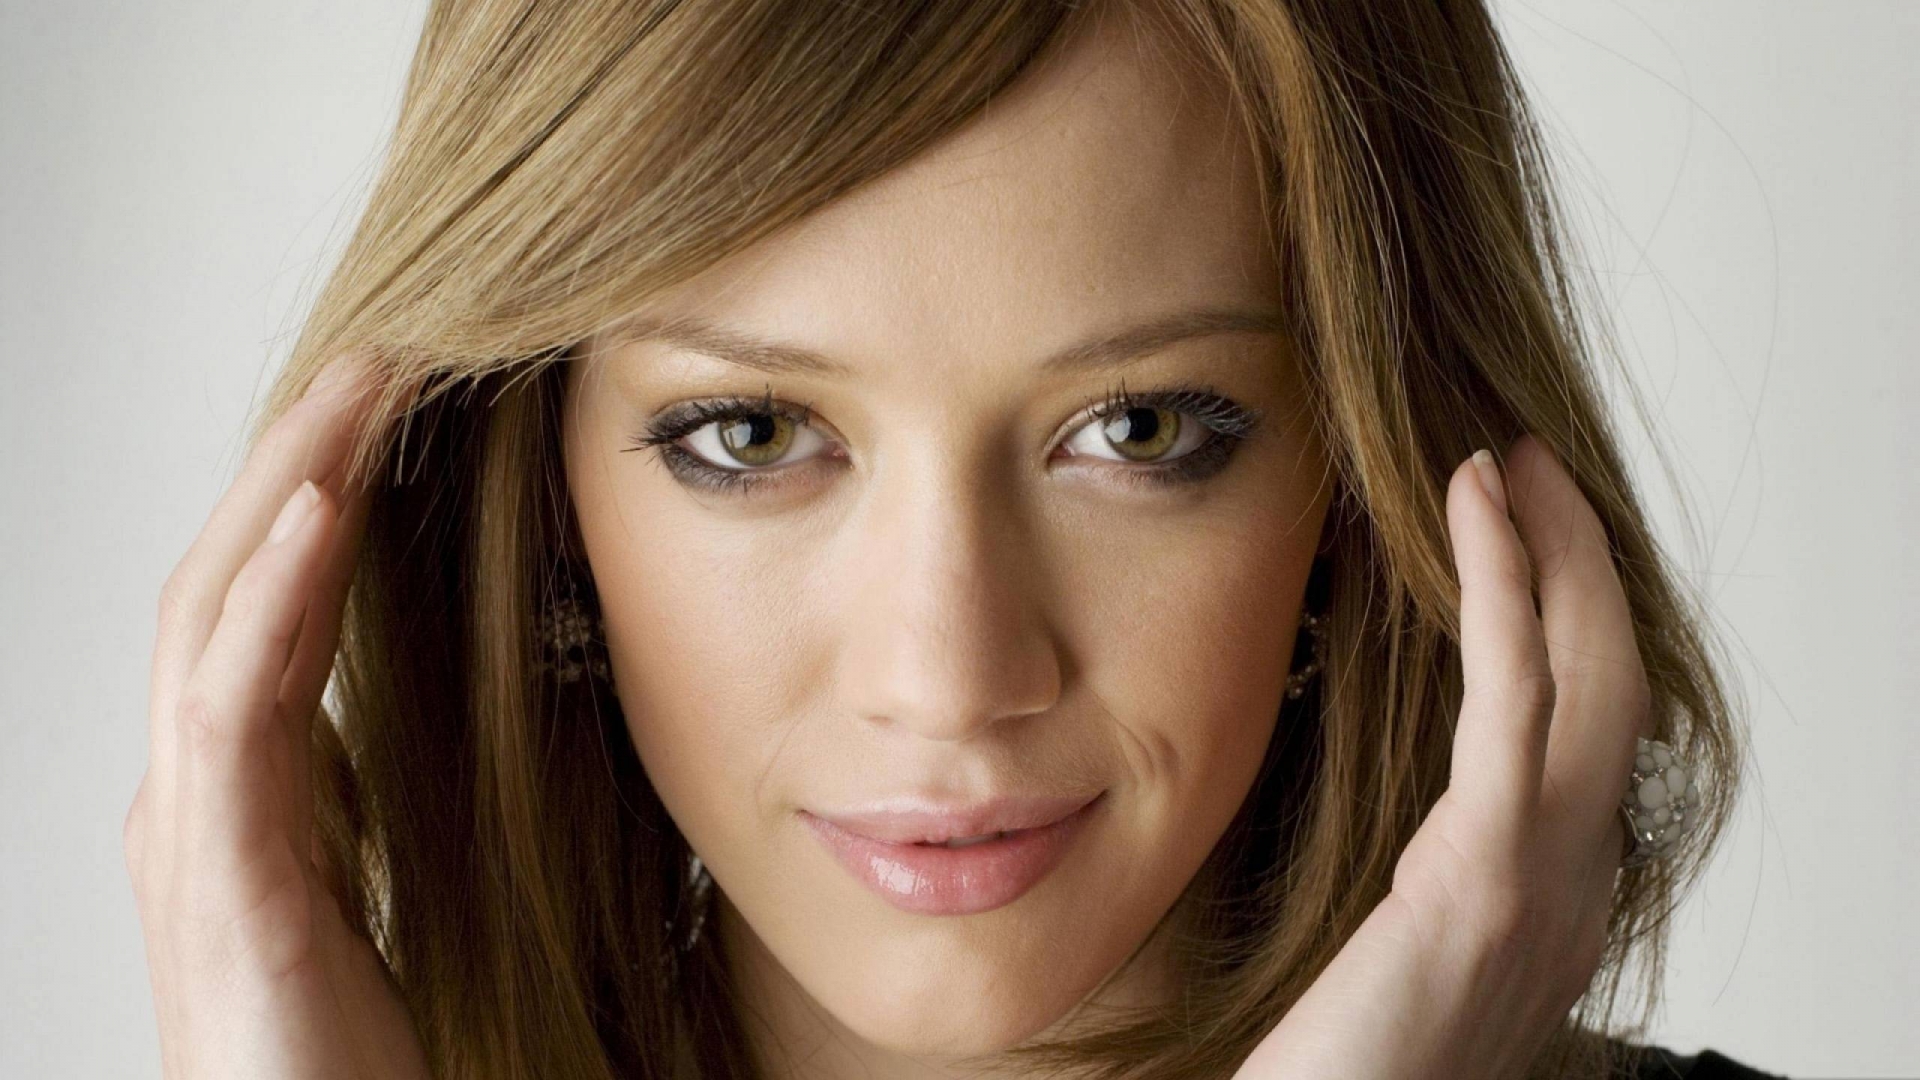 Hilary Duff Close Up for 1920 x 1080 HDTV 1080p resolution